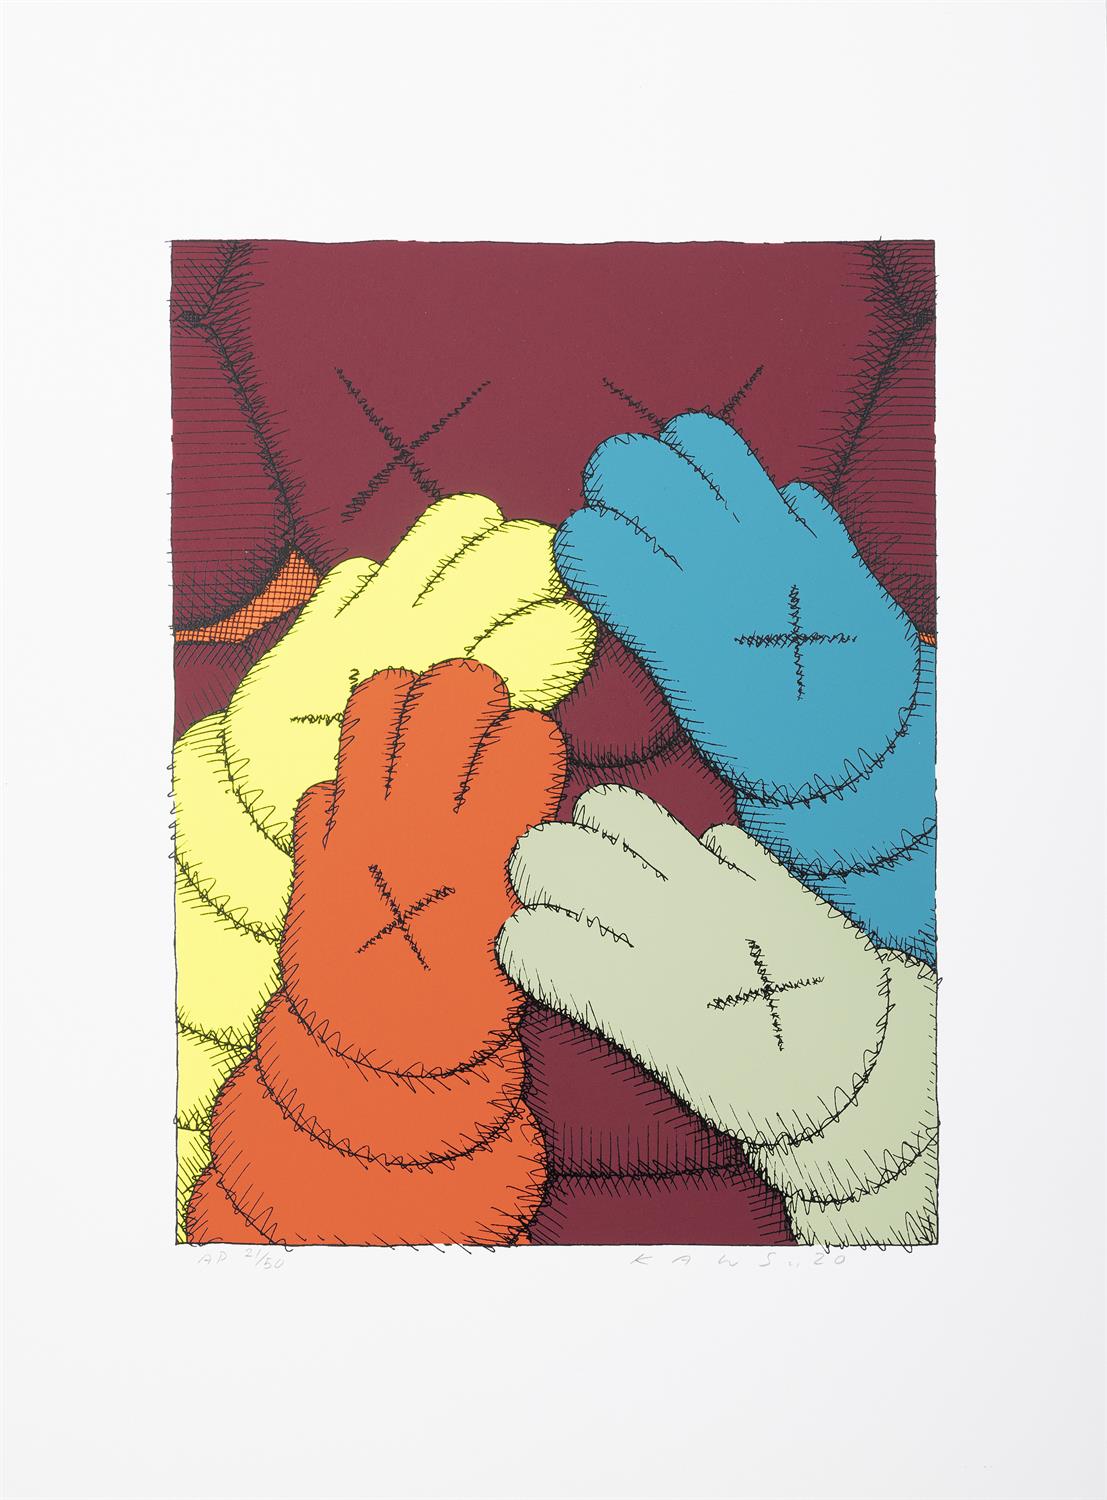 KAWS Untitled, From Urge (2020) Screenprint, sheet size: 43.1 x 32.4cm Signed and dated